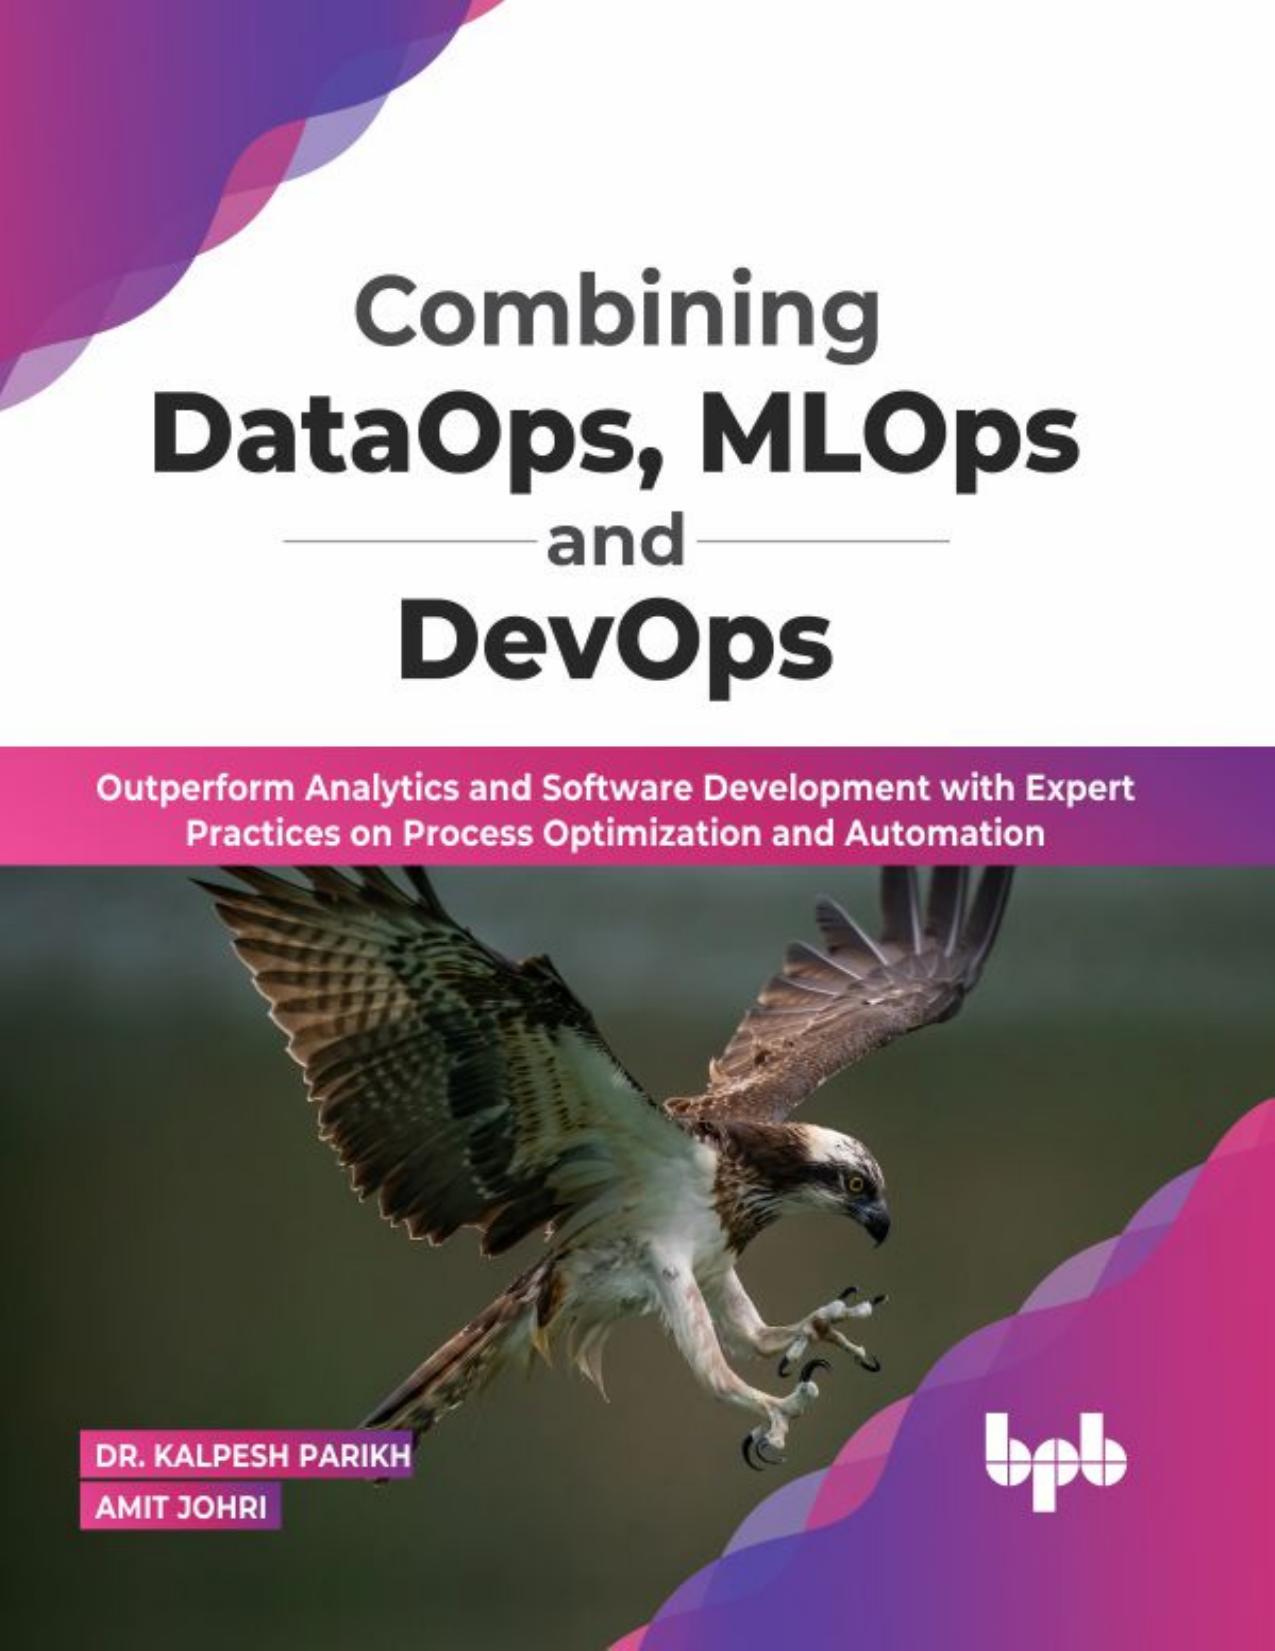 Combining DataOps, MLOps and DevOps: Outperform Analytics and Software Development with Expert Practices on Process Optimization and Automation (English Edition)